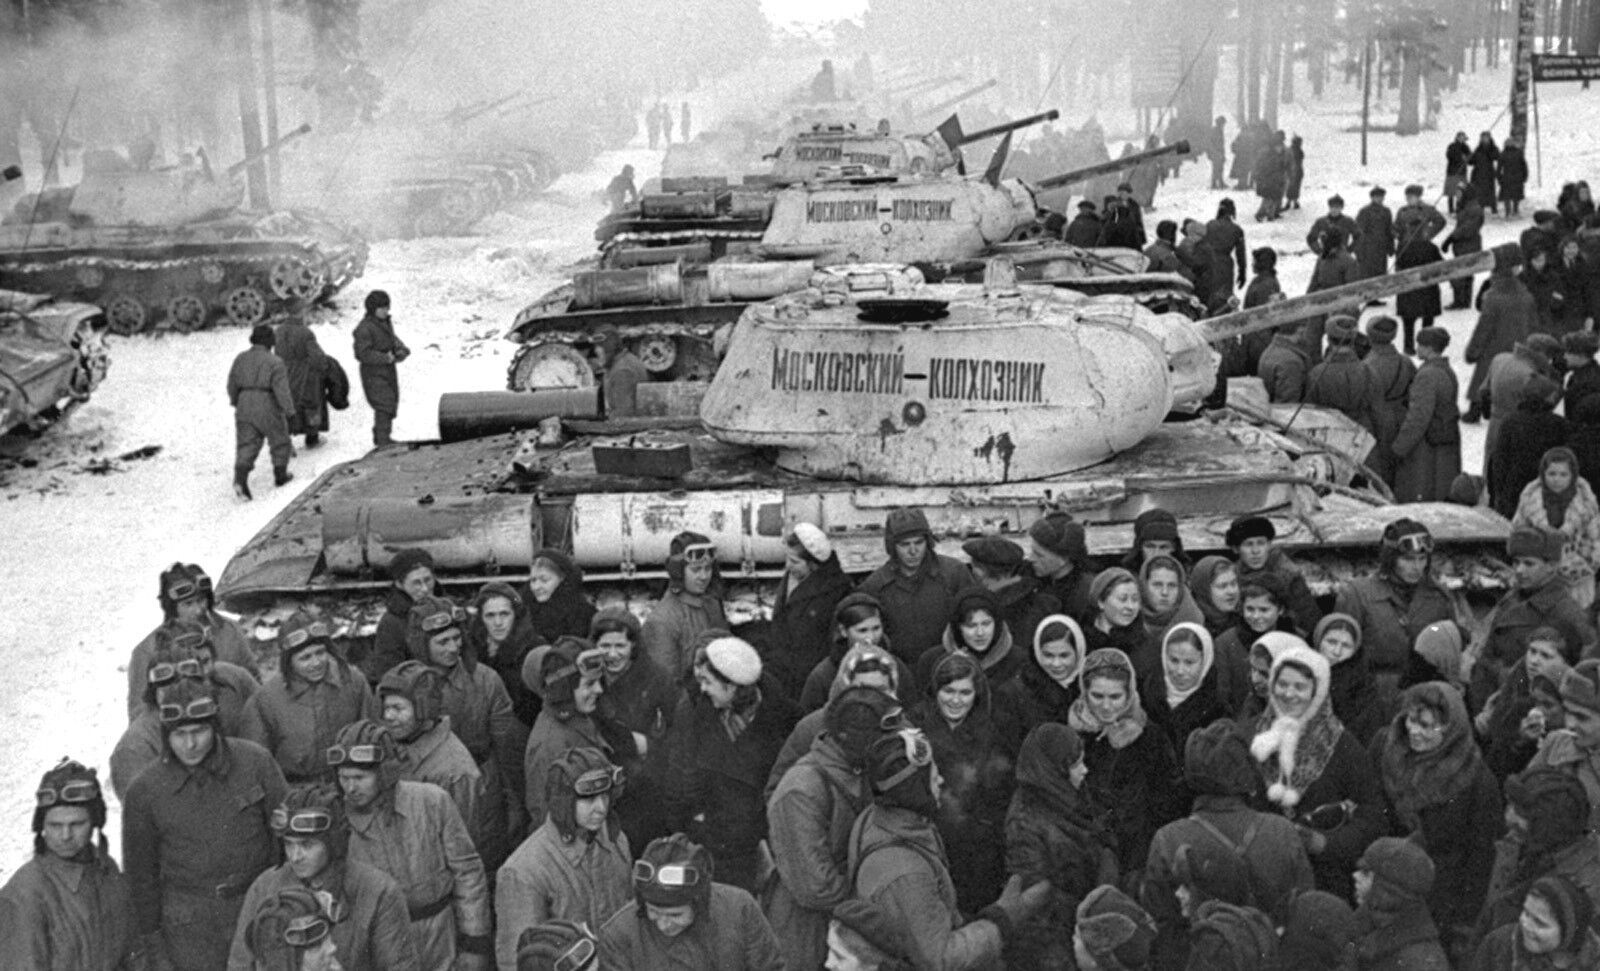 1941-Soviet Collective Farmers from Moscow hand over KV-1 Tanks to Soviets